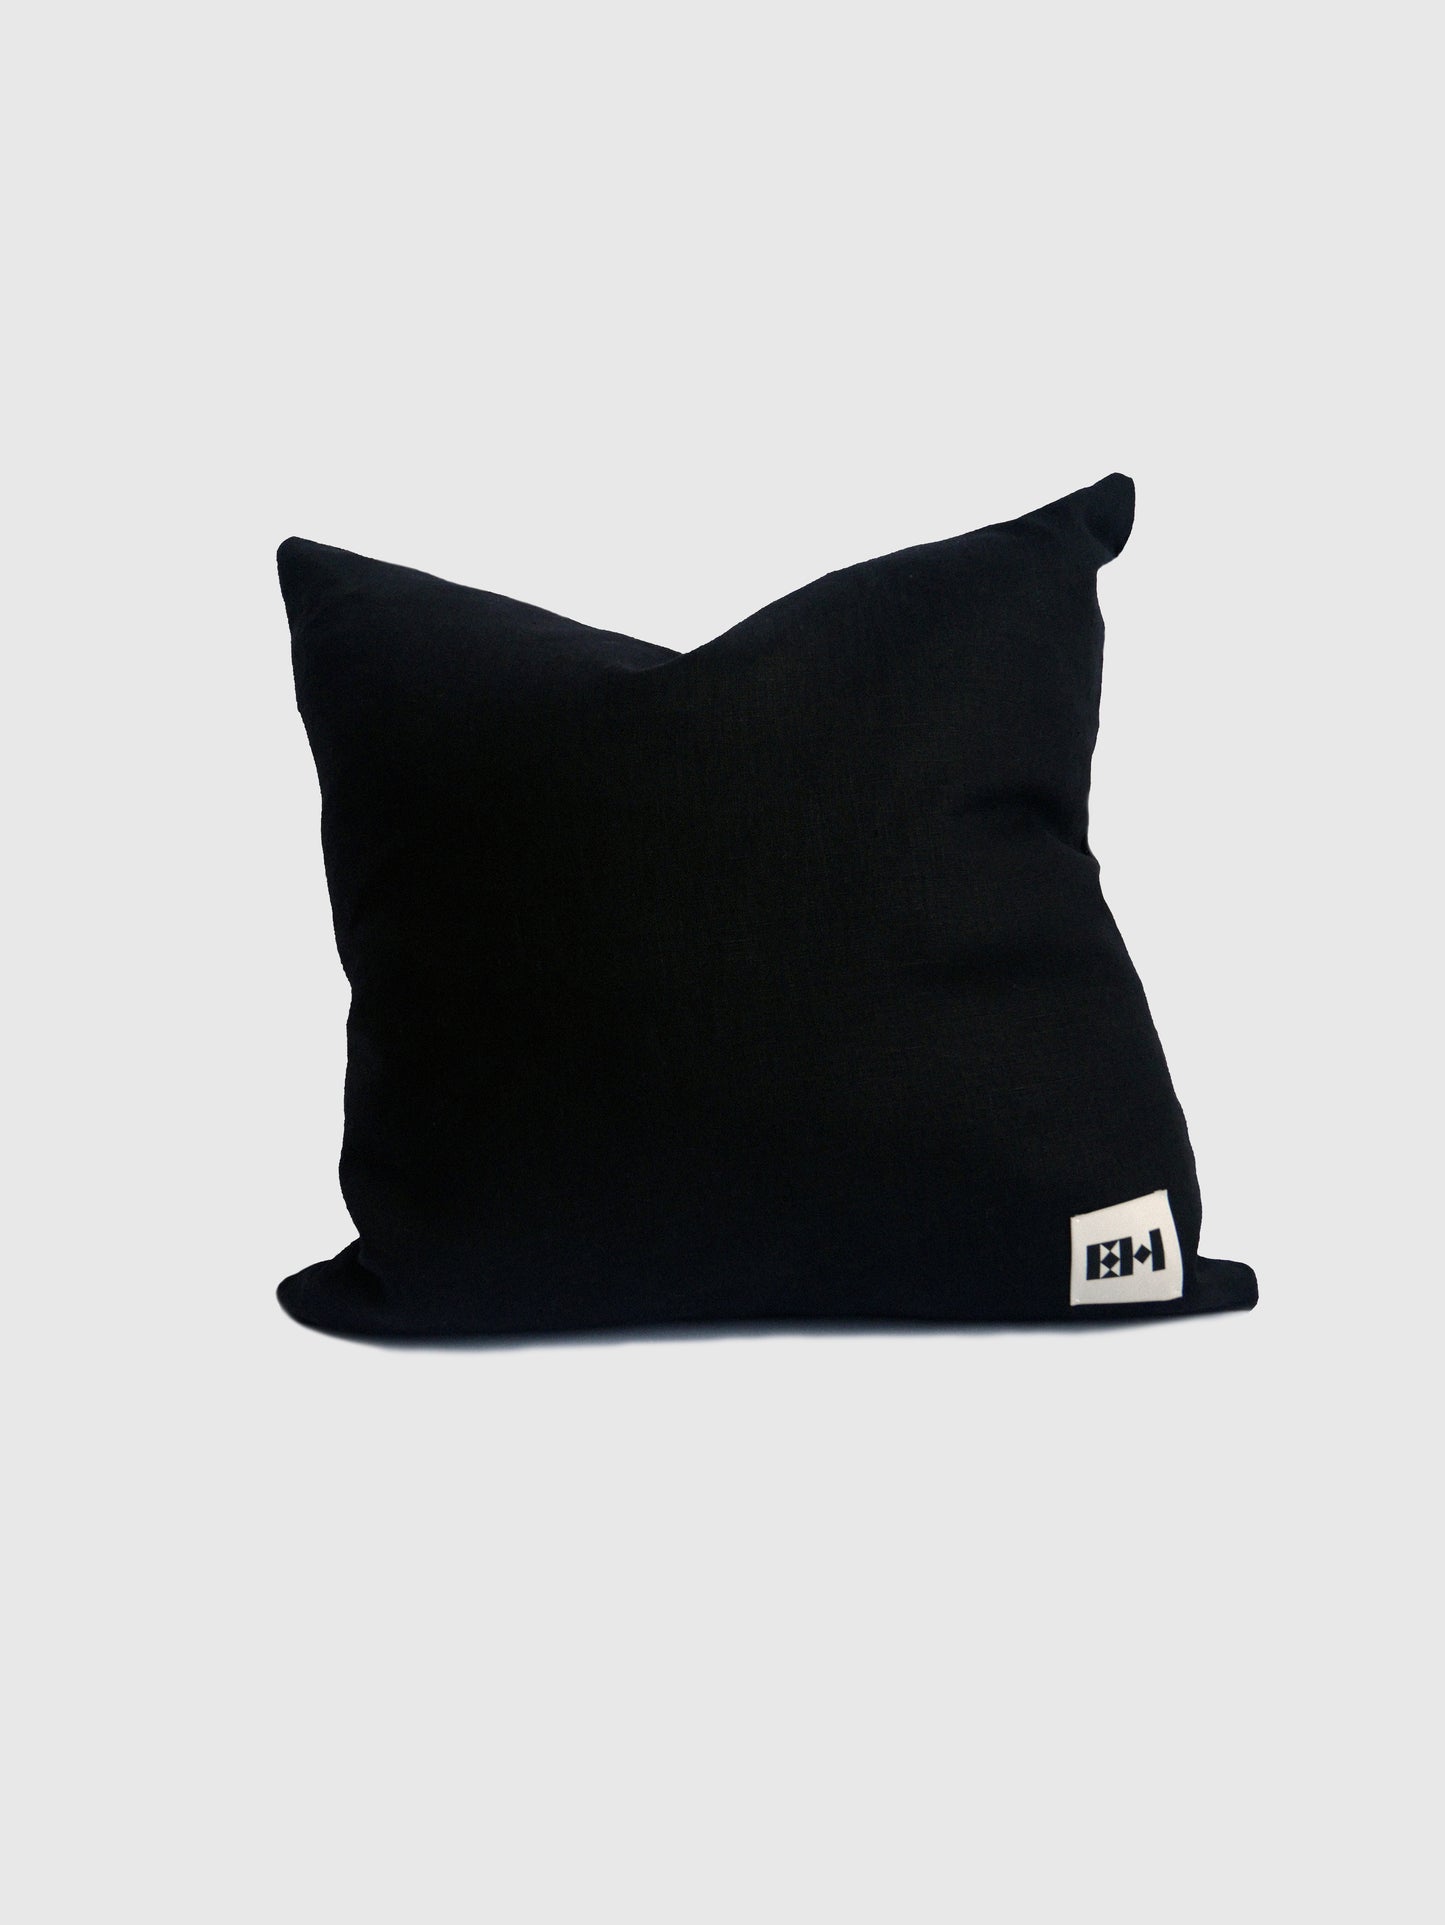 18" square pillow by emma harling